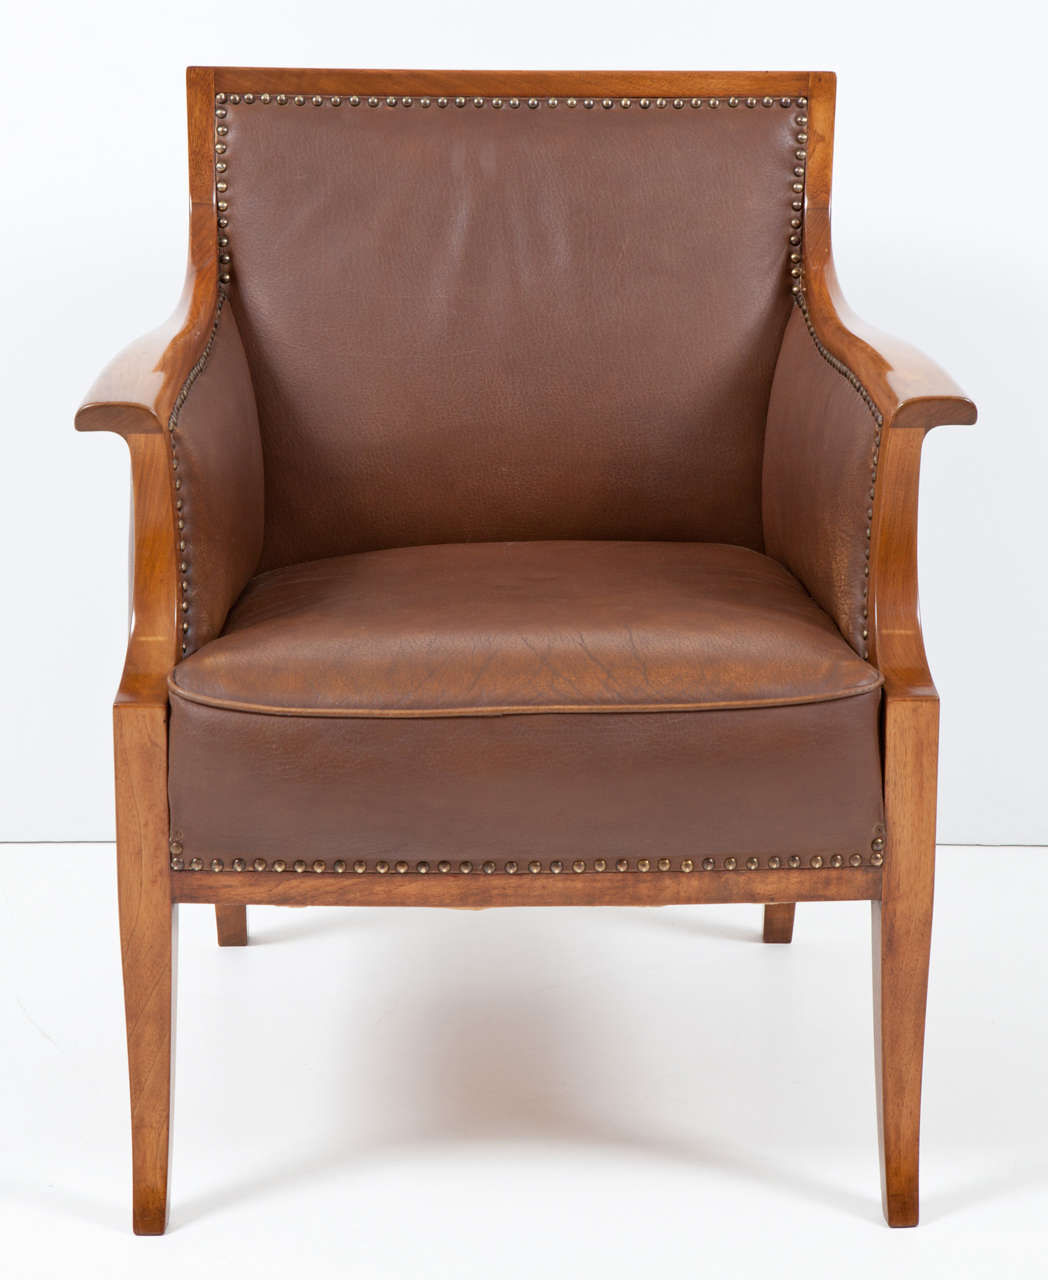 Frits Henningsen walnut armchair with original leather upholstery, circa 1940s, rectangular backrest, tight seat and sabre legs. Good patina to the leather and the frame has been slightly re-polished. Handsome model.